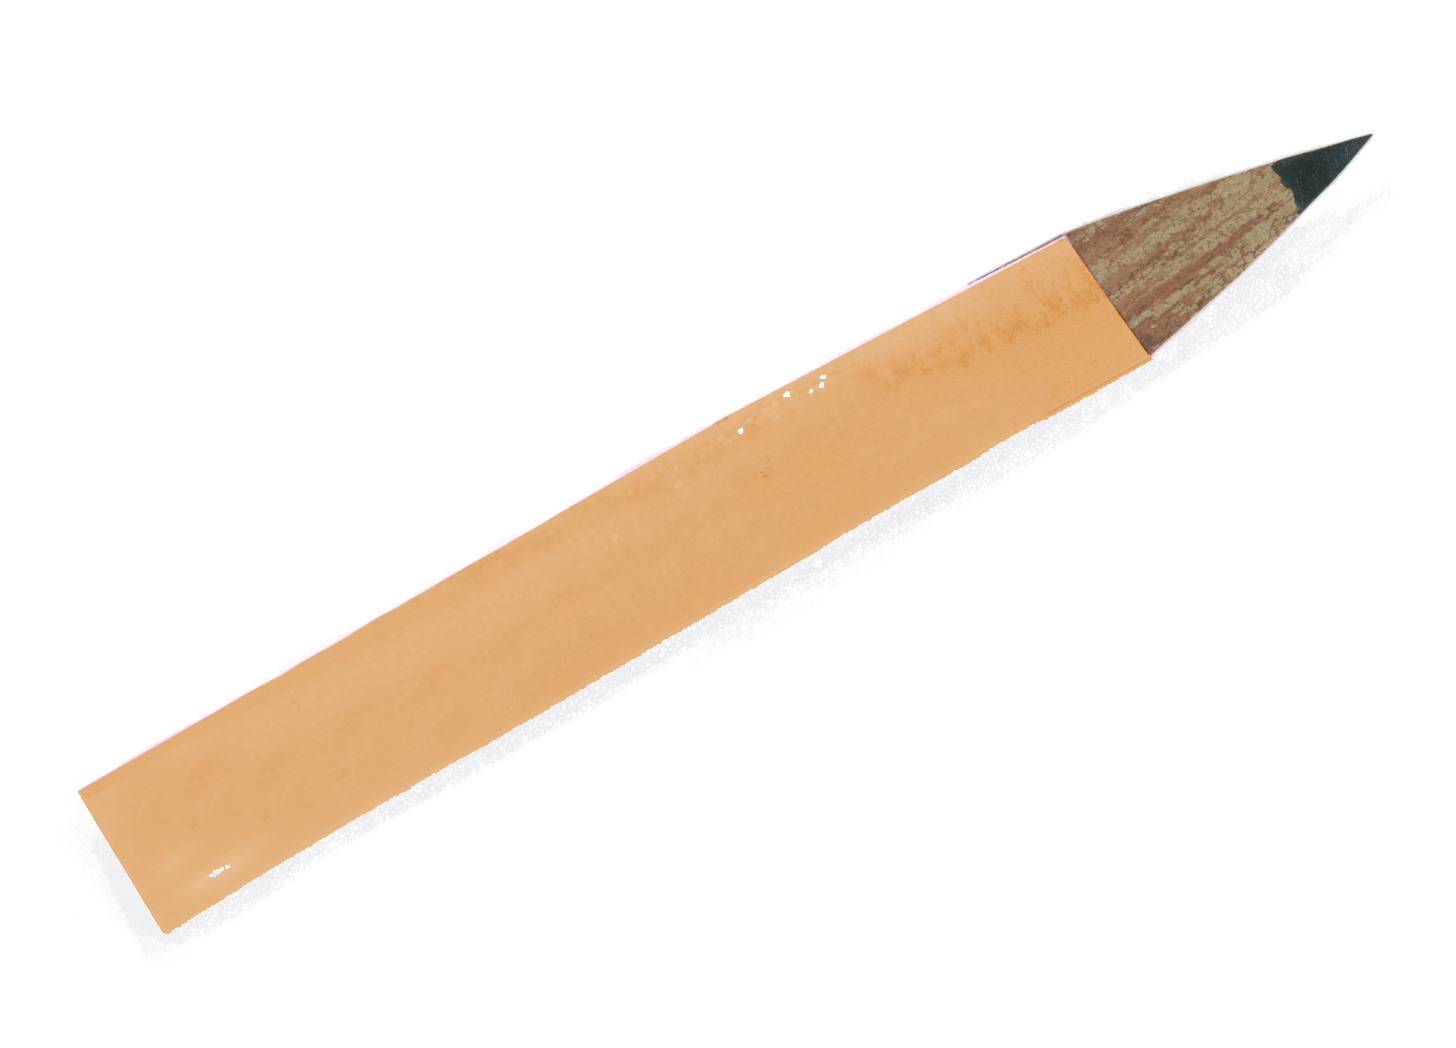 Collage illustration of a light brown pencil